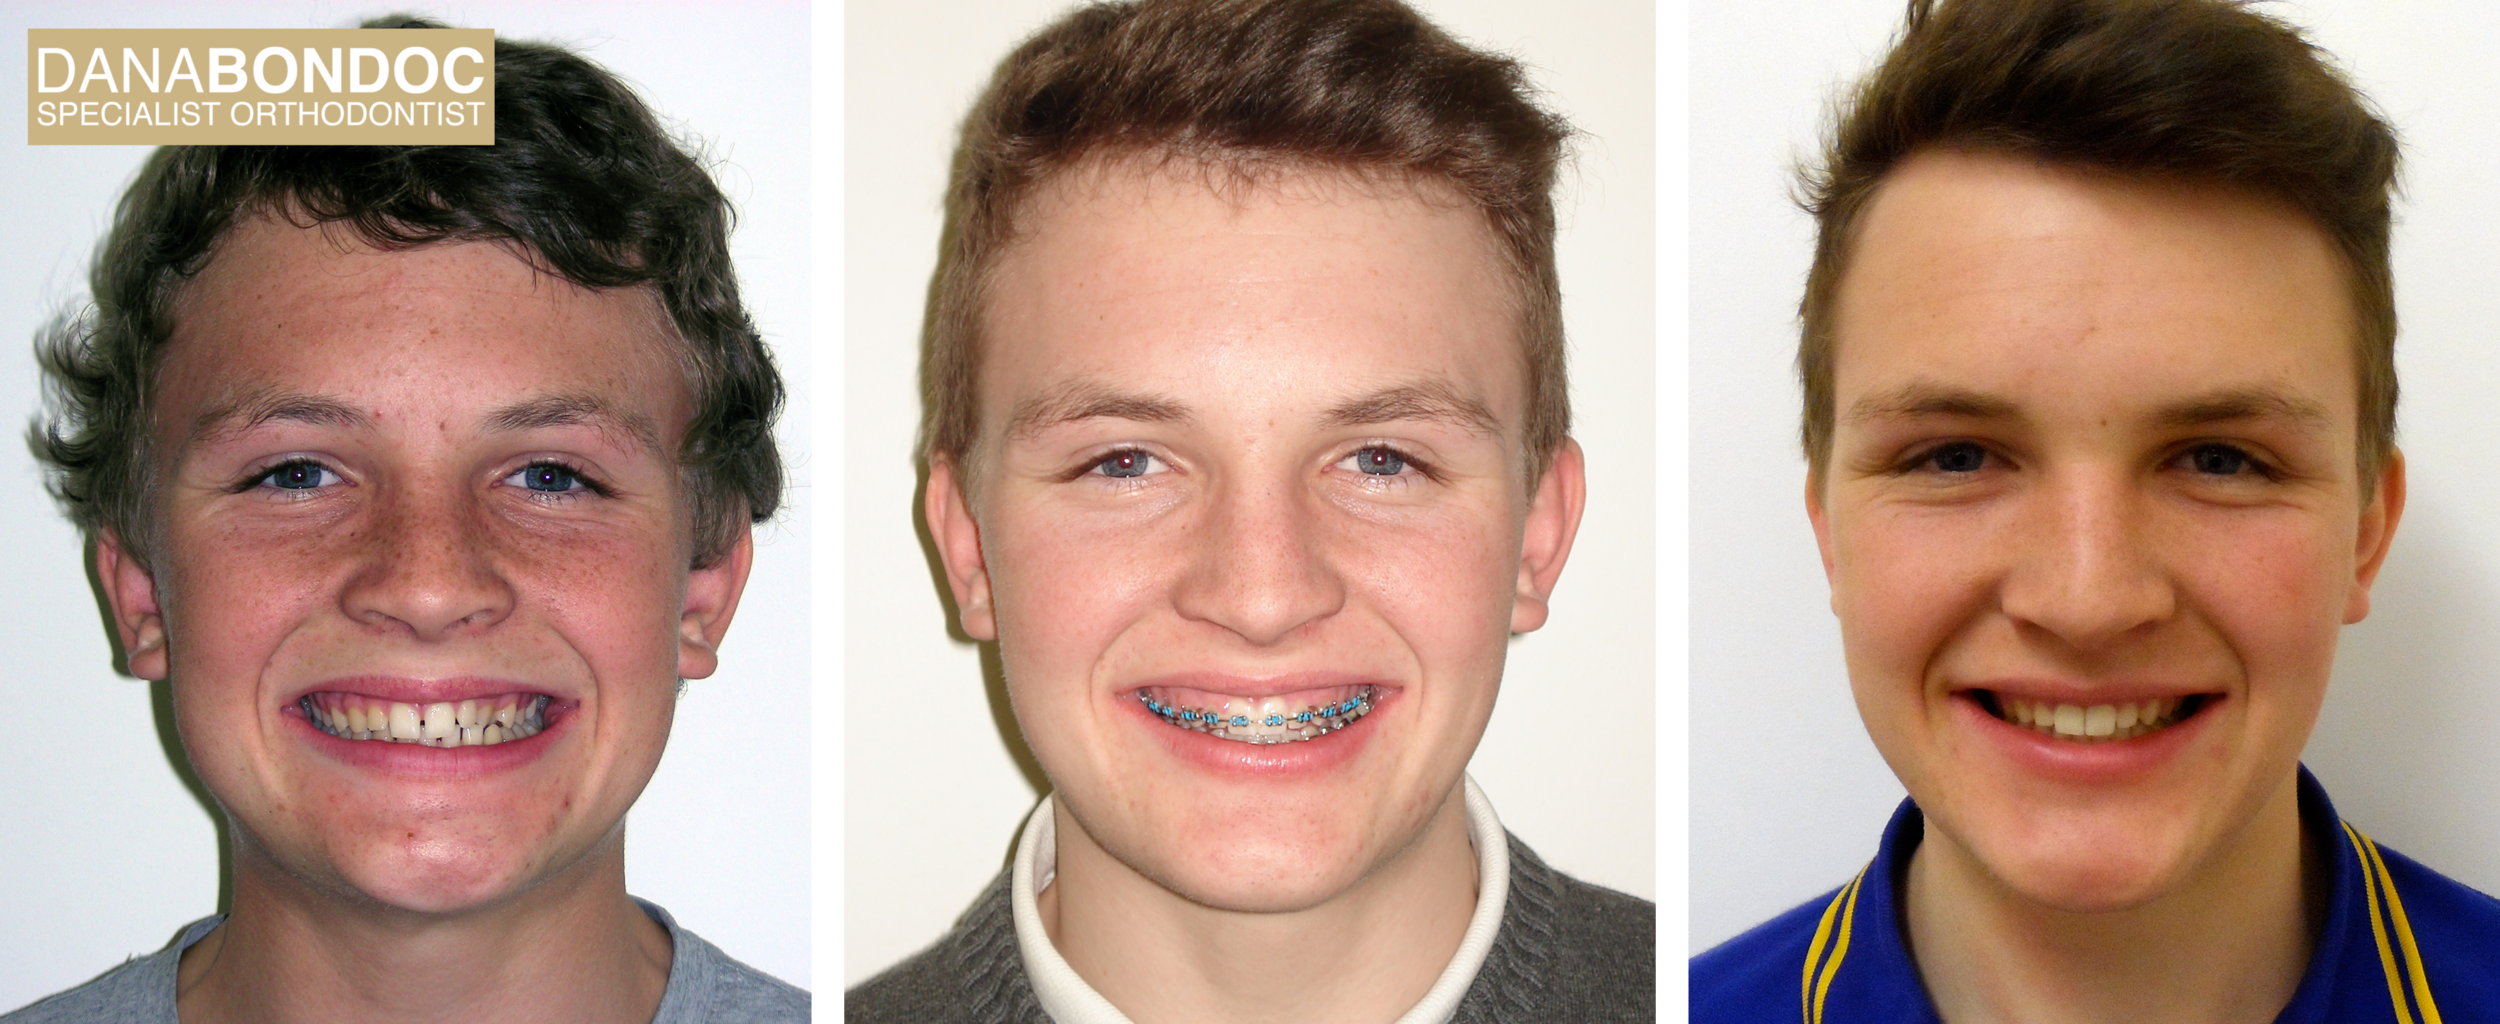 Before treatment, with metal braces on, after treatment photos of a male teenager for the treatment of spacing and an anterior cross bite.